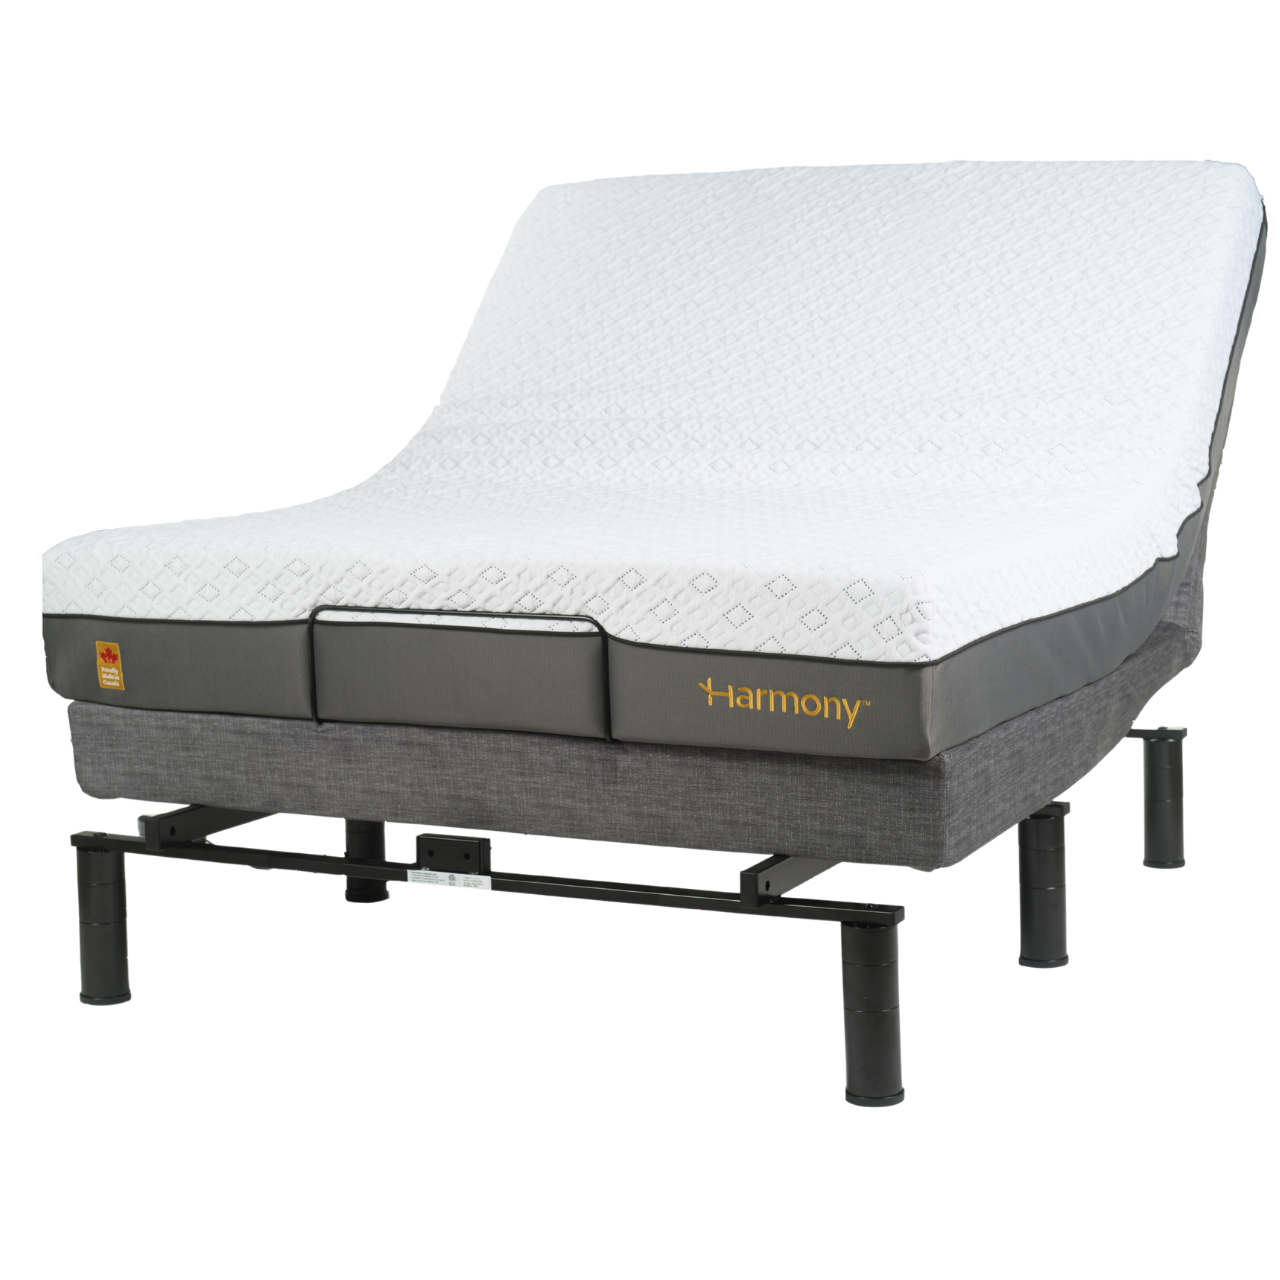 Harmony 3 bed base with mattress